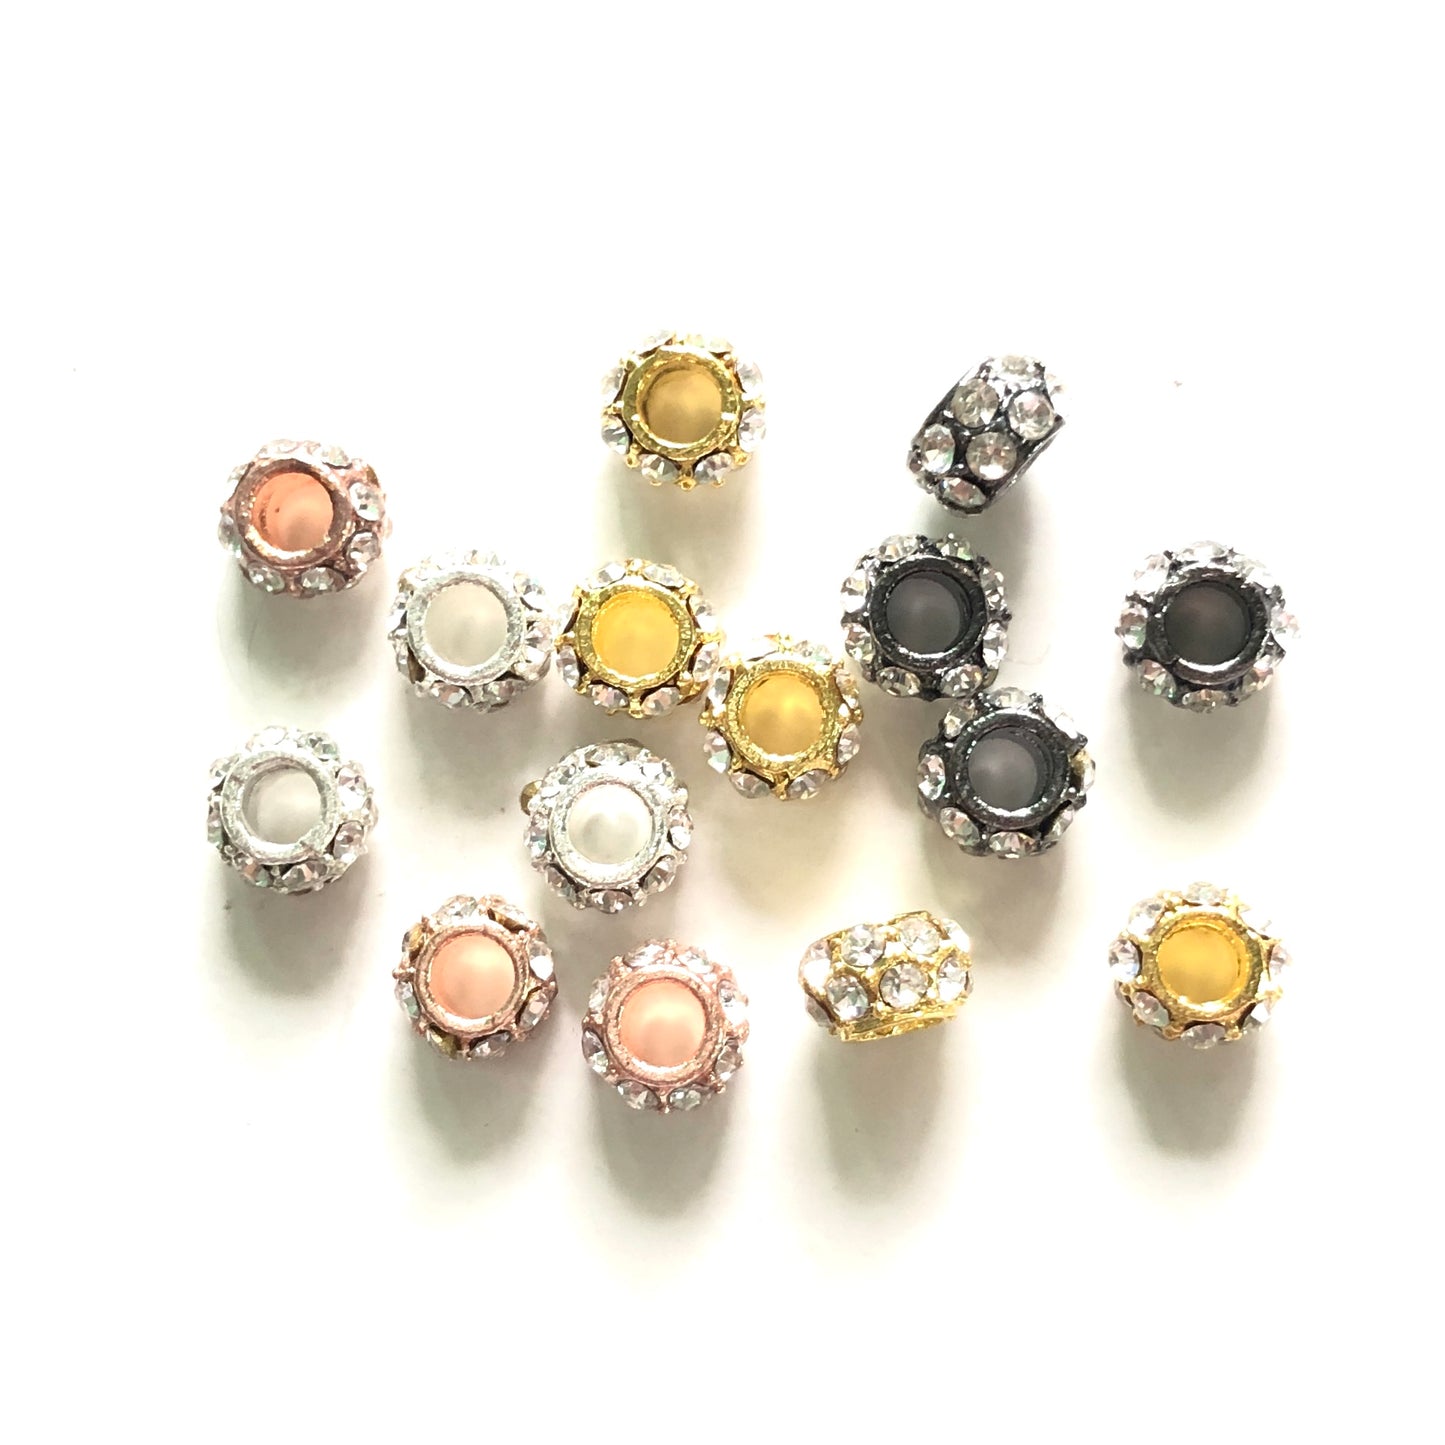 20-50pcs/lot 6mm Clear Rhinestone Paved Alloy Wheel Spacers Mix Colors Alloy Spacers & Wholesale Charms Beads Beyond